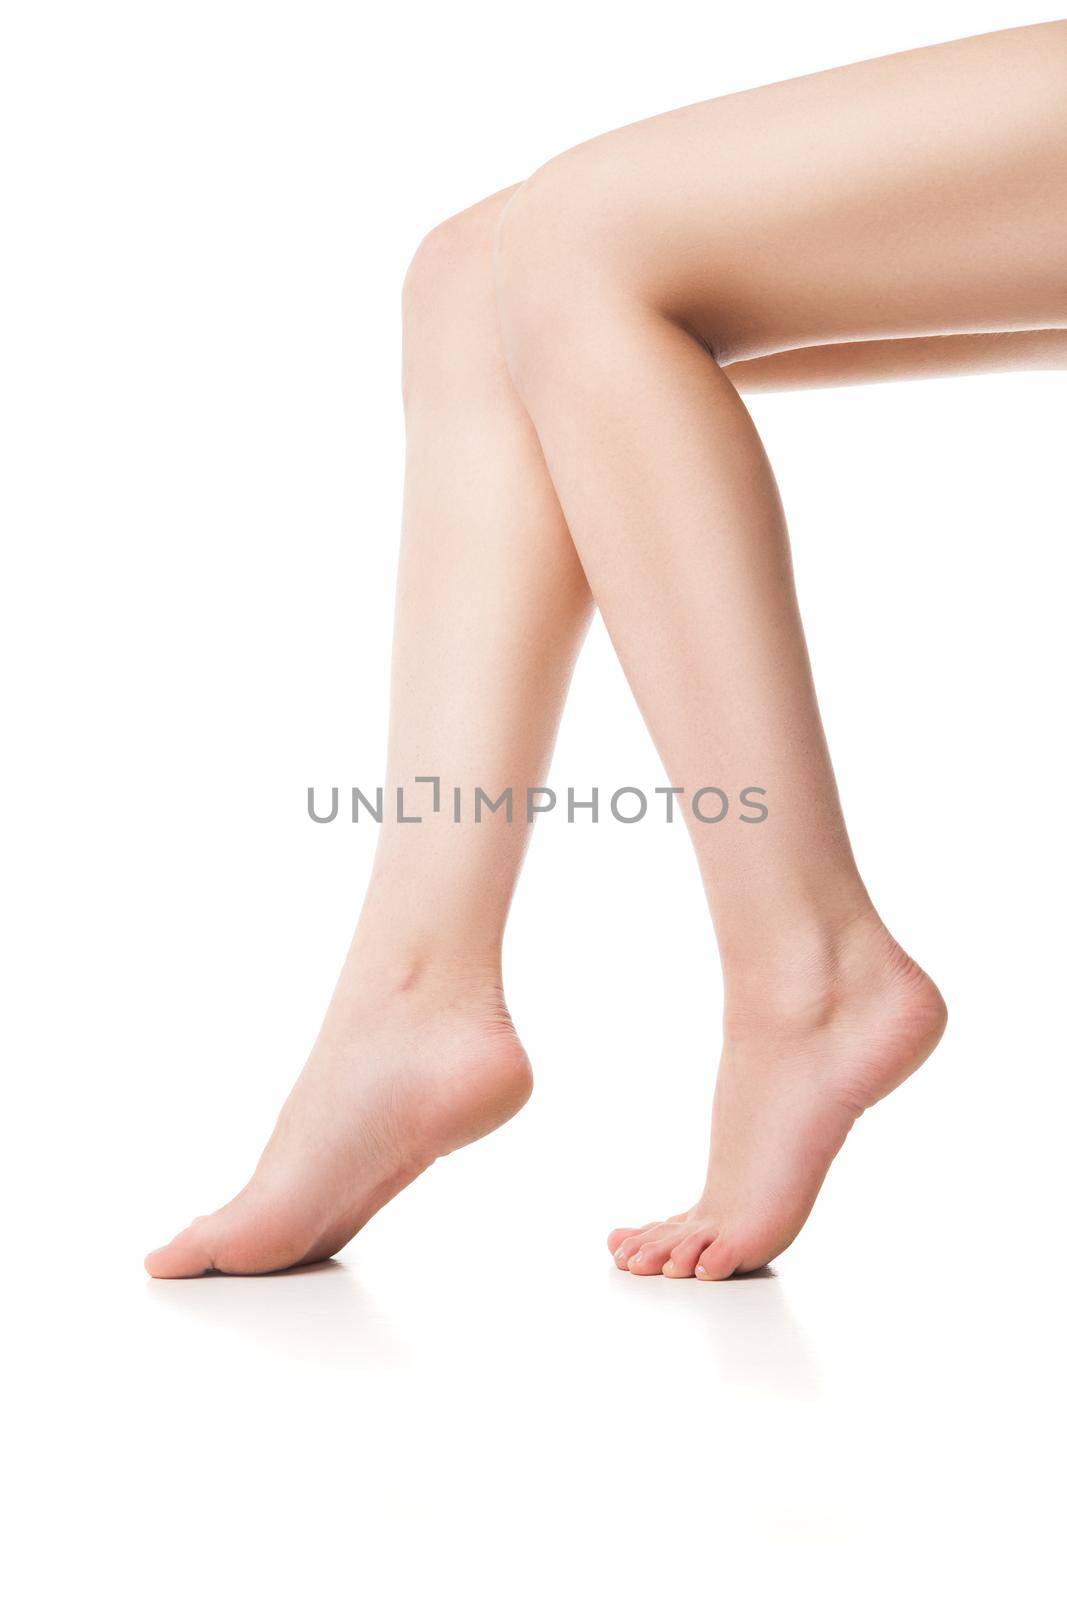 Close up of young woman's legs by Julenochek